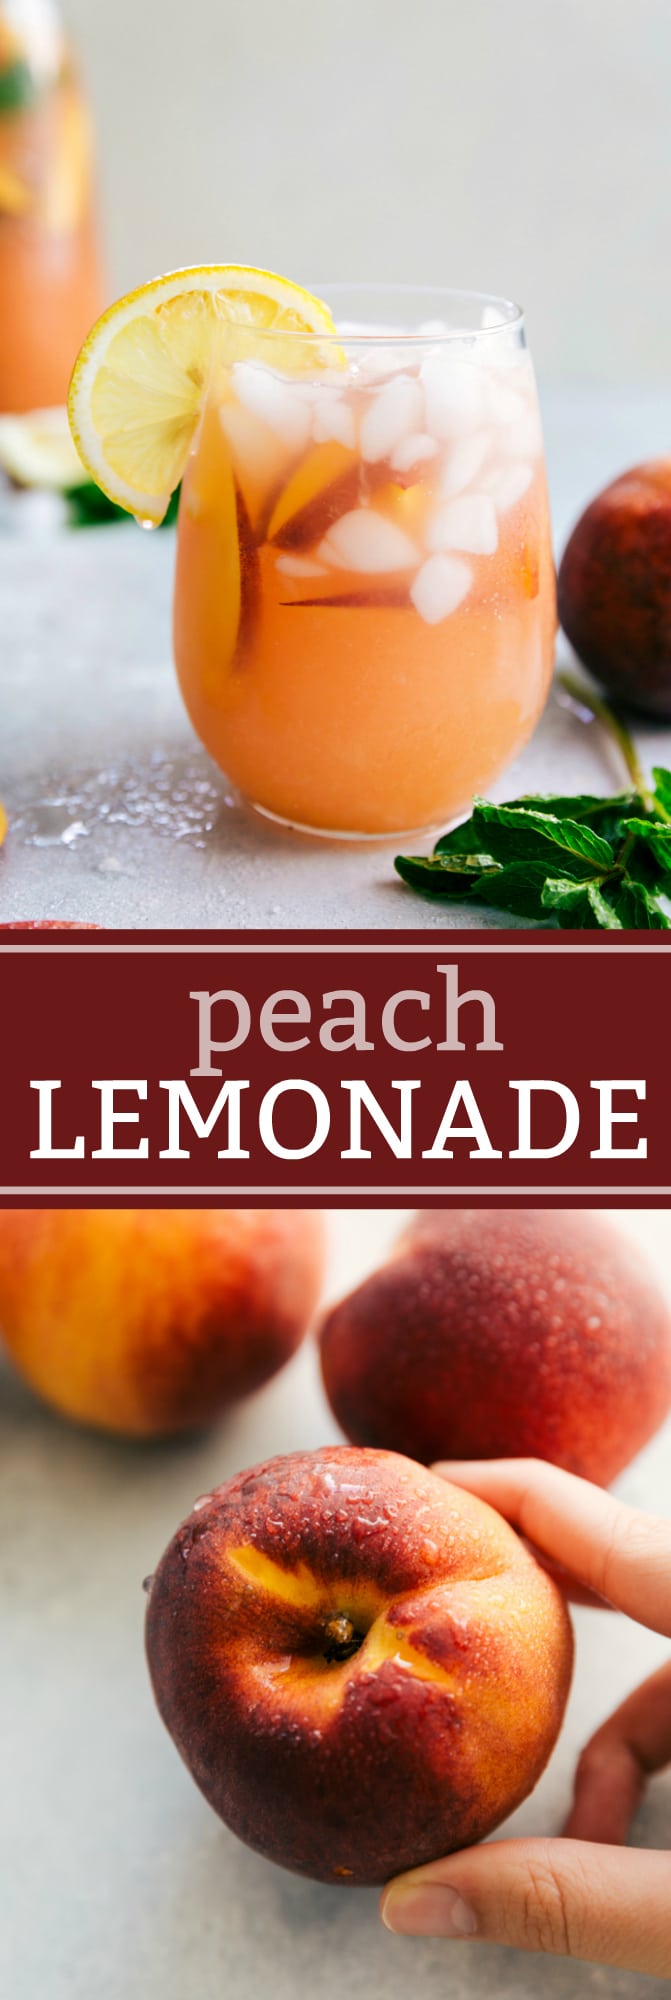 Only 44 calories for a glass of this mega-refreshing and delicious PEACH LEMONADE! via chelseasmessyapron.com